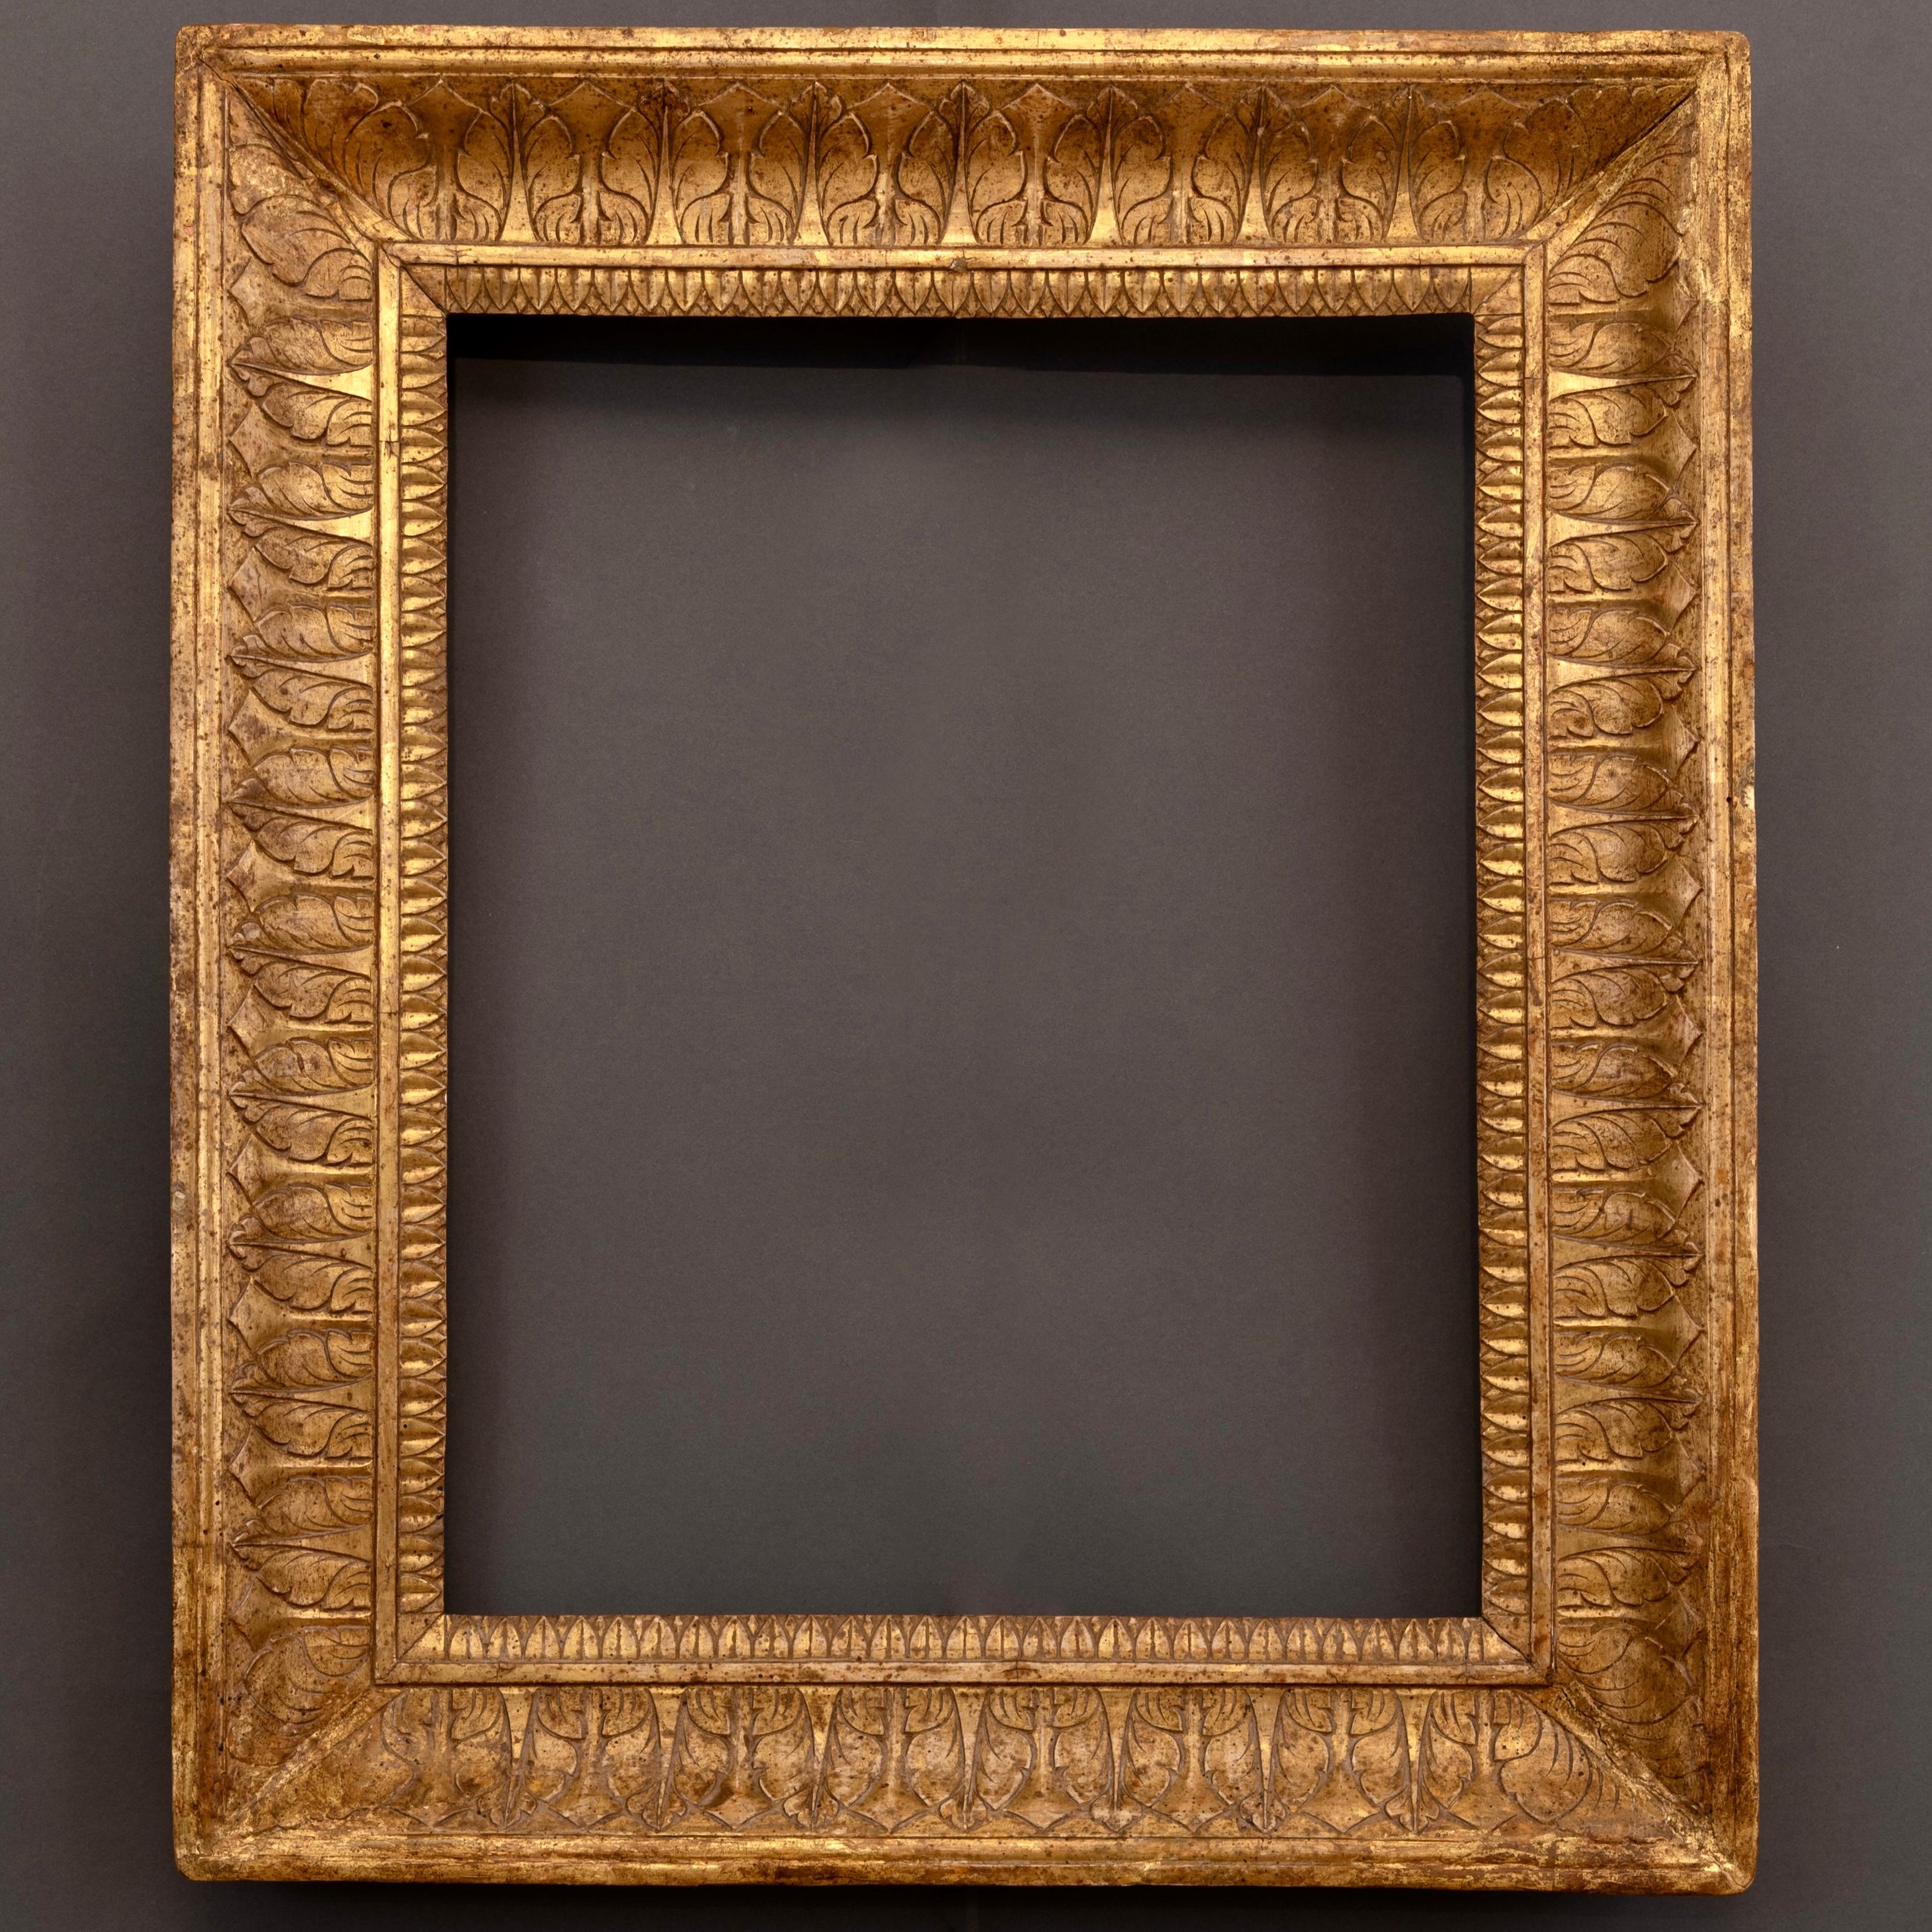 Period Giltwood Large Italian Empire Frame For Sale 1